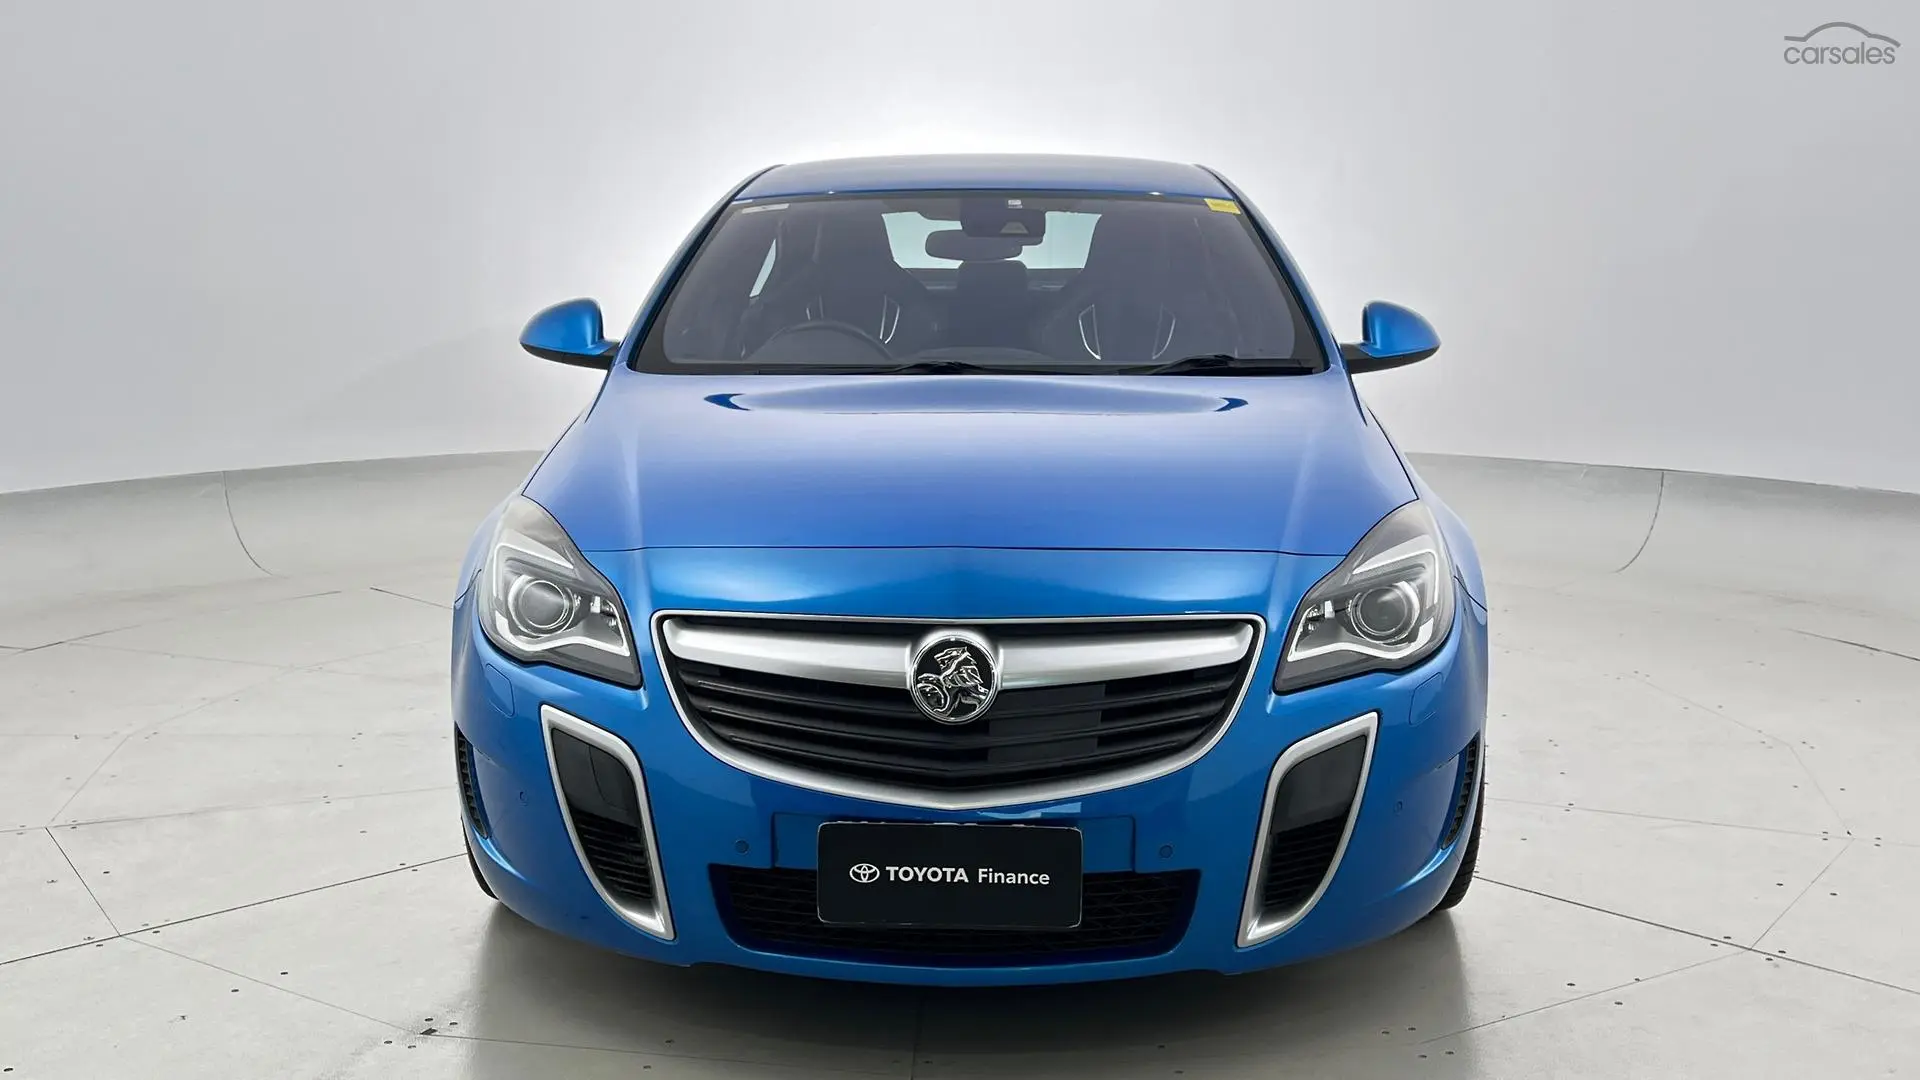 2015 Holden Insignia Image 10